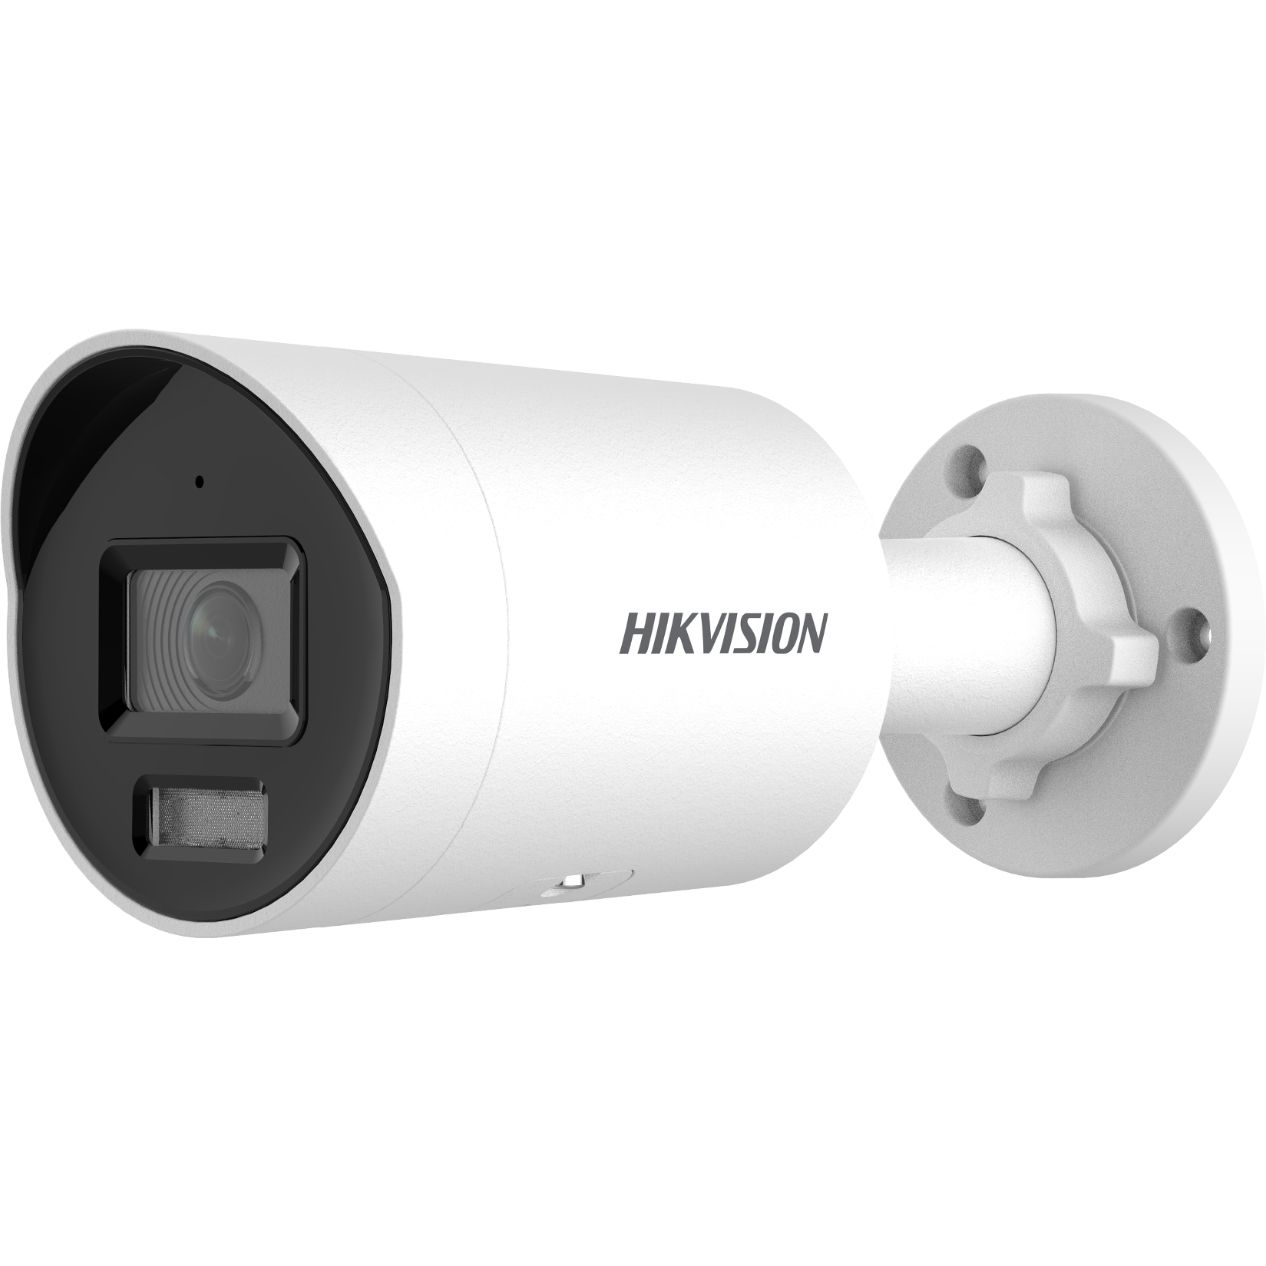 IP-камера Hikvision DS-2CD2023G2-IU(2.8mm) white (УТ-00042017) ip камера hikvision